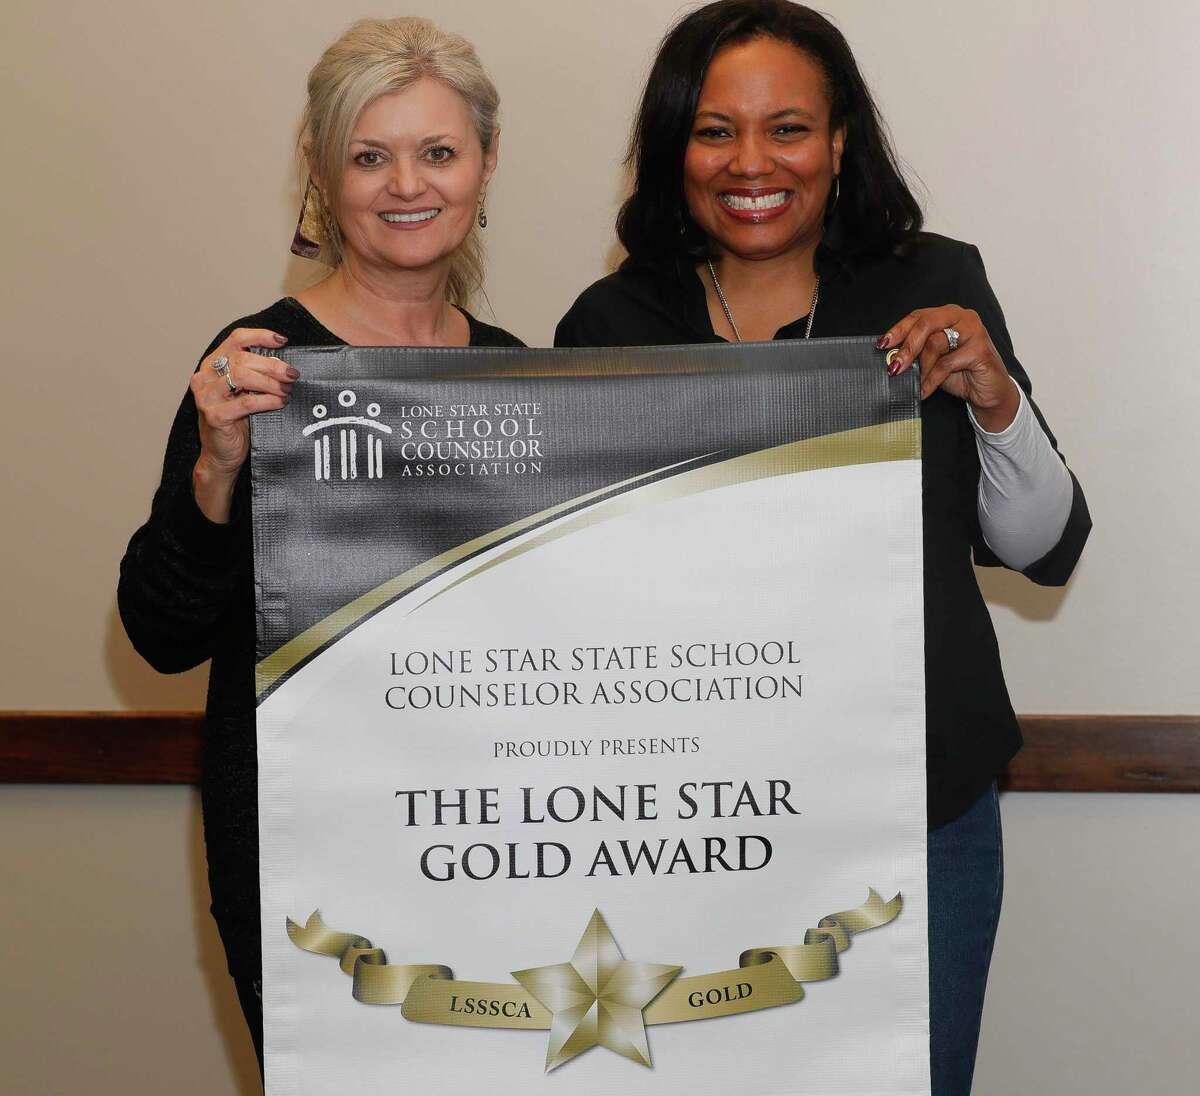 Caney Creek High School counselors Tiffany Rhodriguez, left, and Jan Stronger-Lindberg are part of the 10-person counseling staff that won the Lone Star State School Counselor Association’s gold award, which recognizes effective and outstanding school counseling programs.